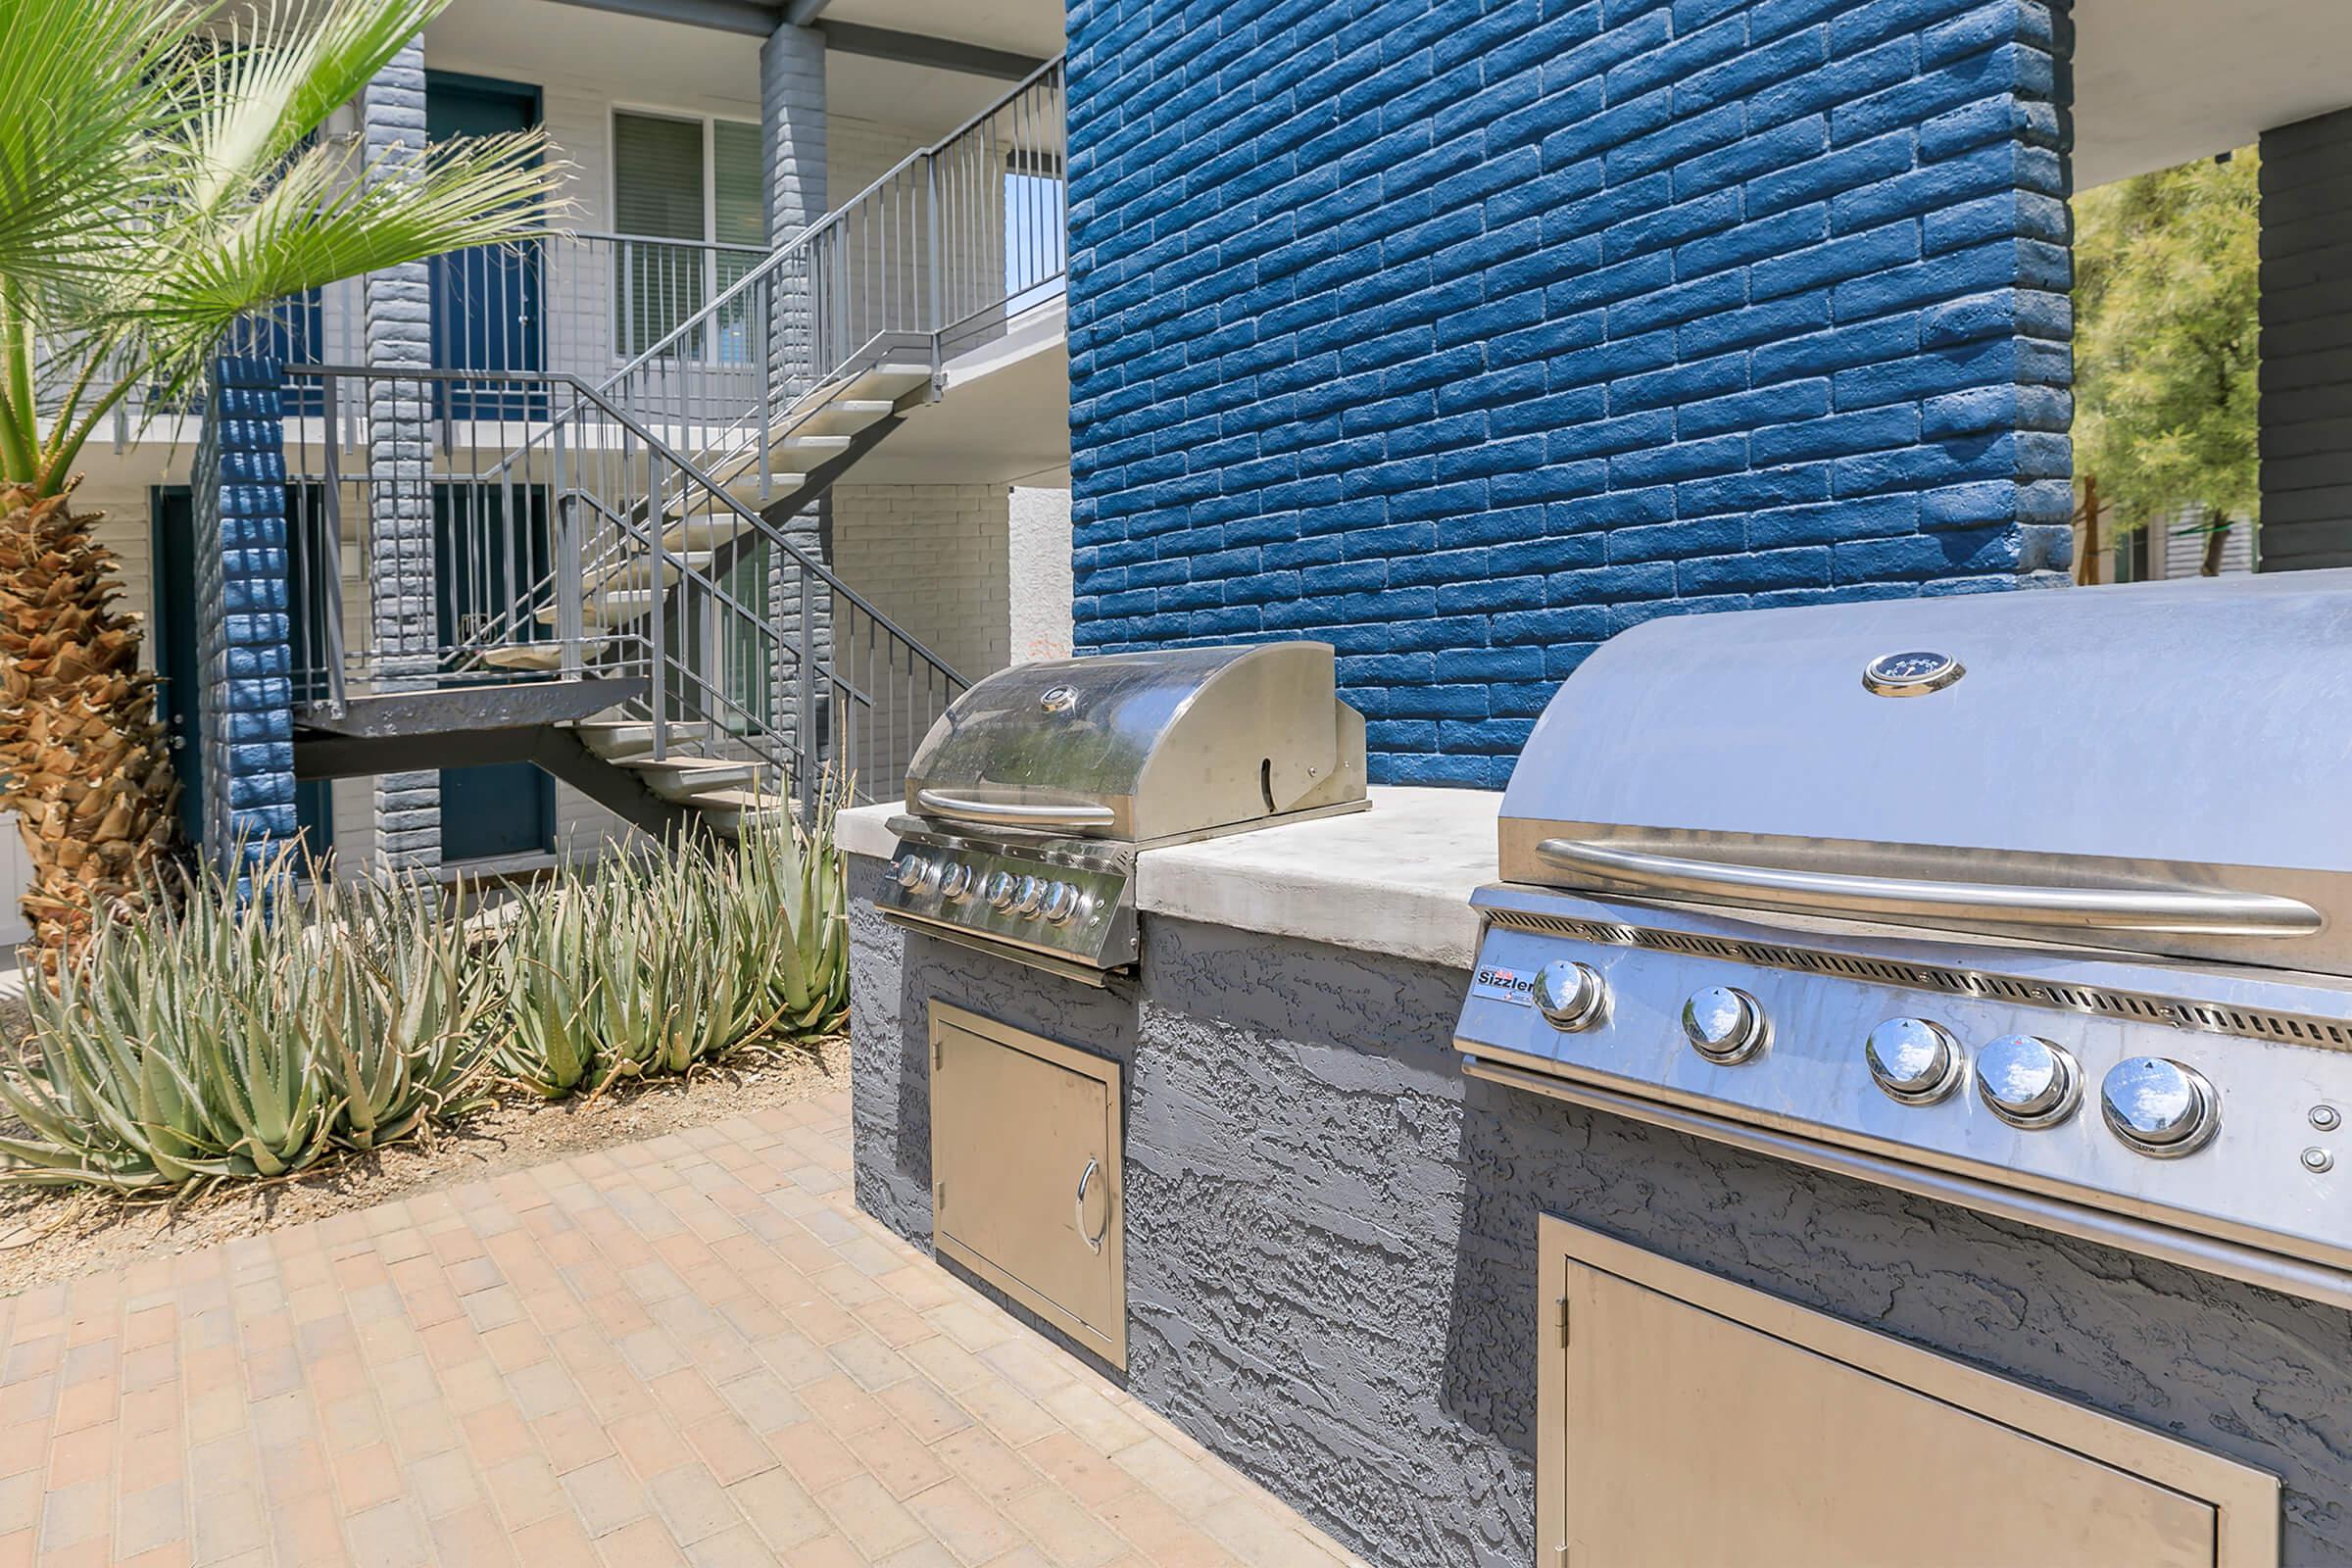 Stainless steel bbq grills in Rise Canyon West outdoor community grilling area